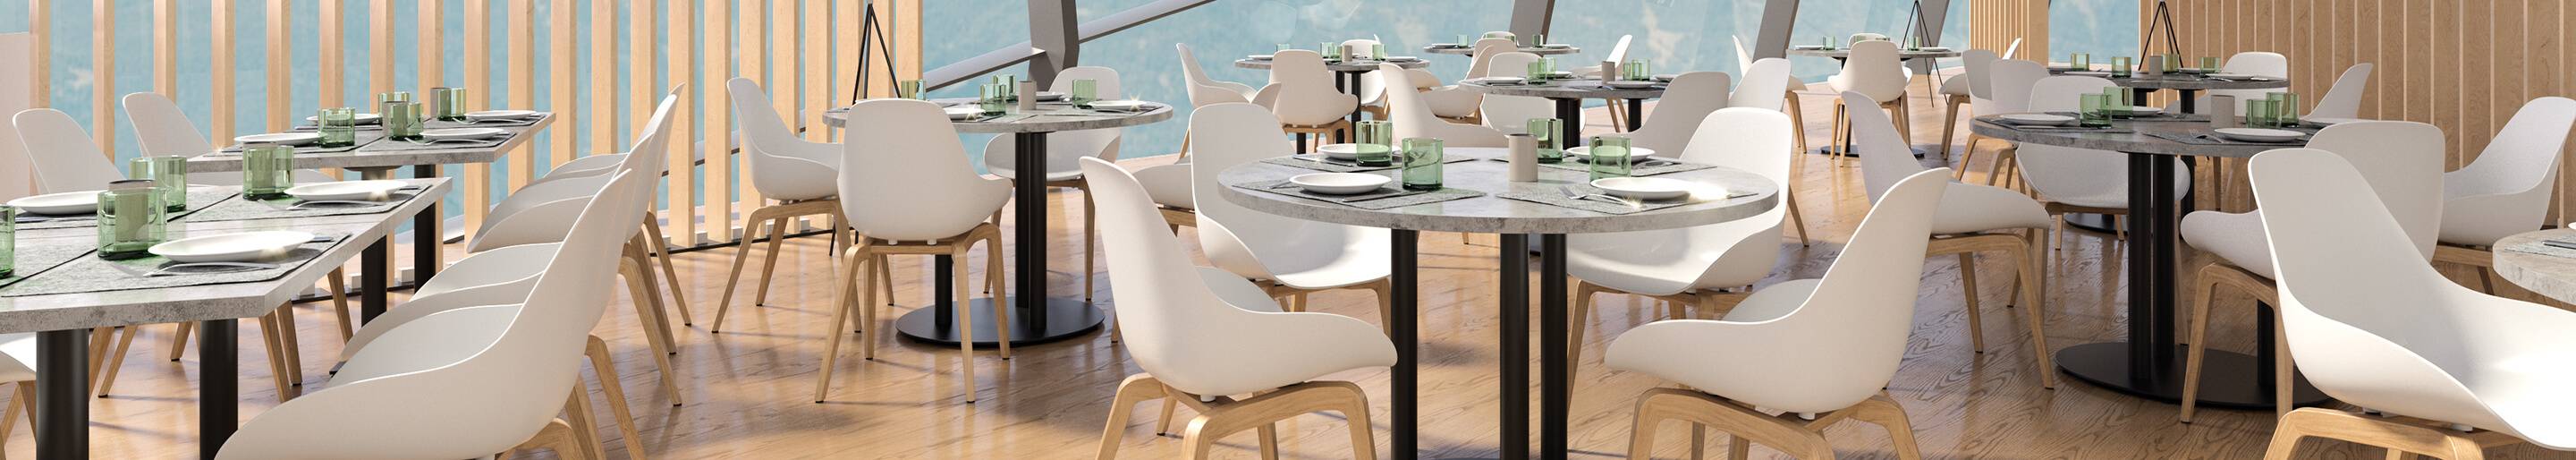 Indoor Shell chairs for your restaurant or hotel